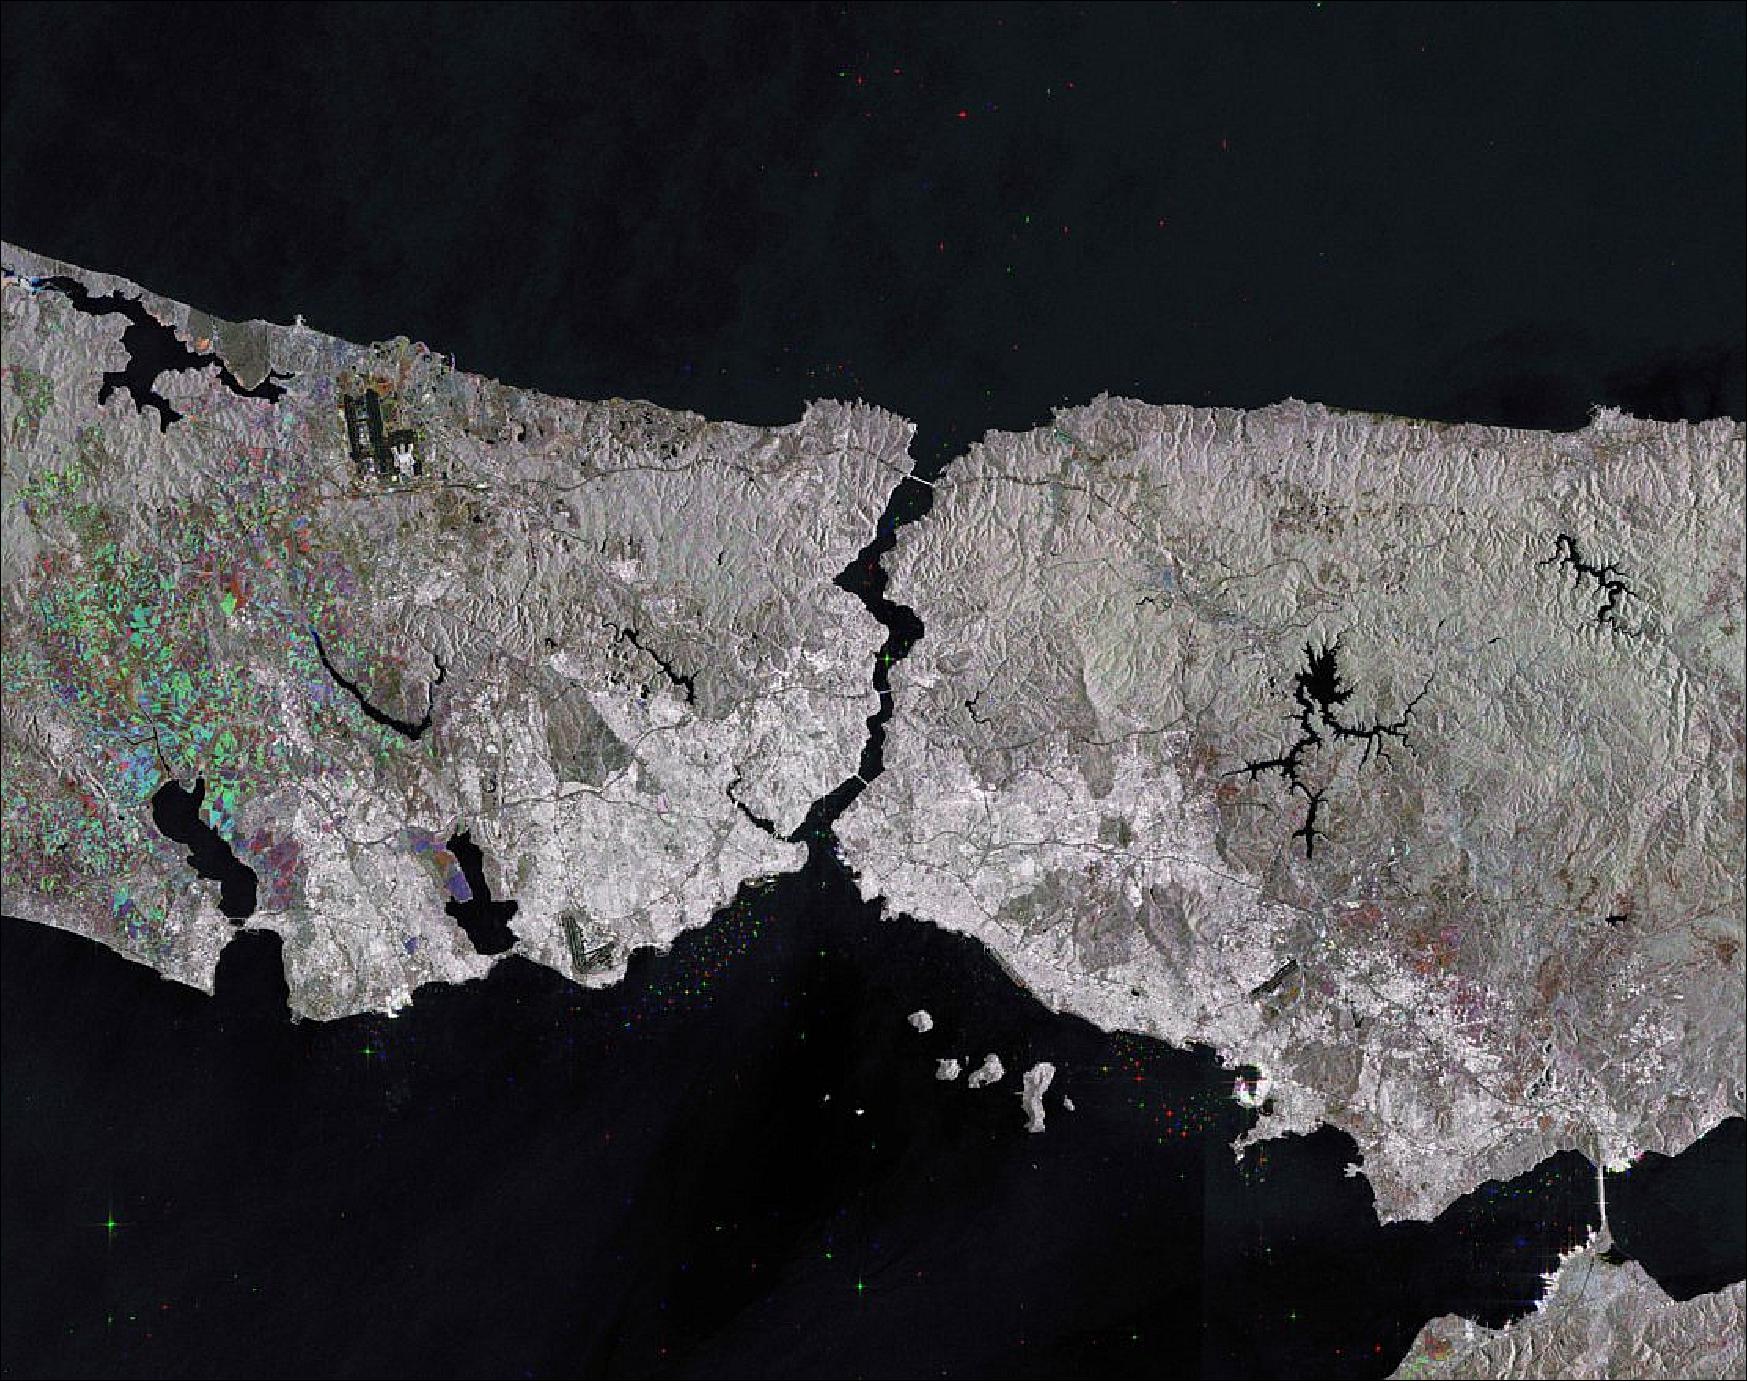 Figure 22: Captured by the Copernicus Sentinel-1 mission, this image shows the narrow strait that connects eastern Europe to western Asia: the Bosphorus in northwest Turkey. The image contains satellite data stitched together from three radar scans acquired on 2 June, 8 July and 13 August 2018. This image is also featured on the Earth from Space video program (image credit: ESA, the image contains modified Copernicus Sentinel data (2018), processed by ESA, CC BY-SA 3.0 IGO)